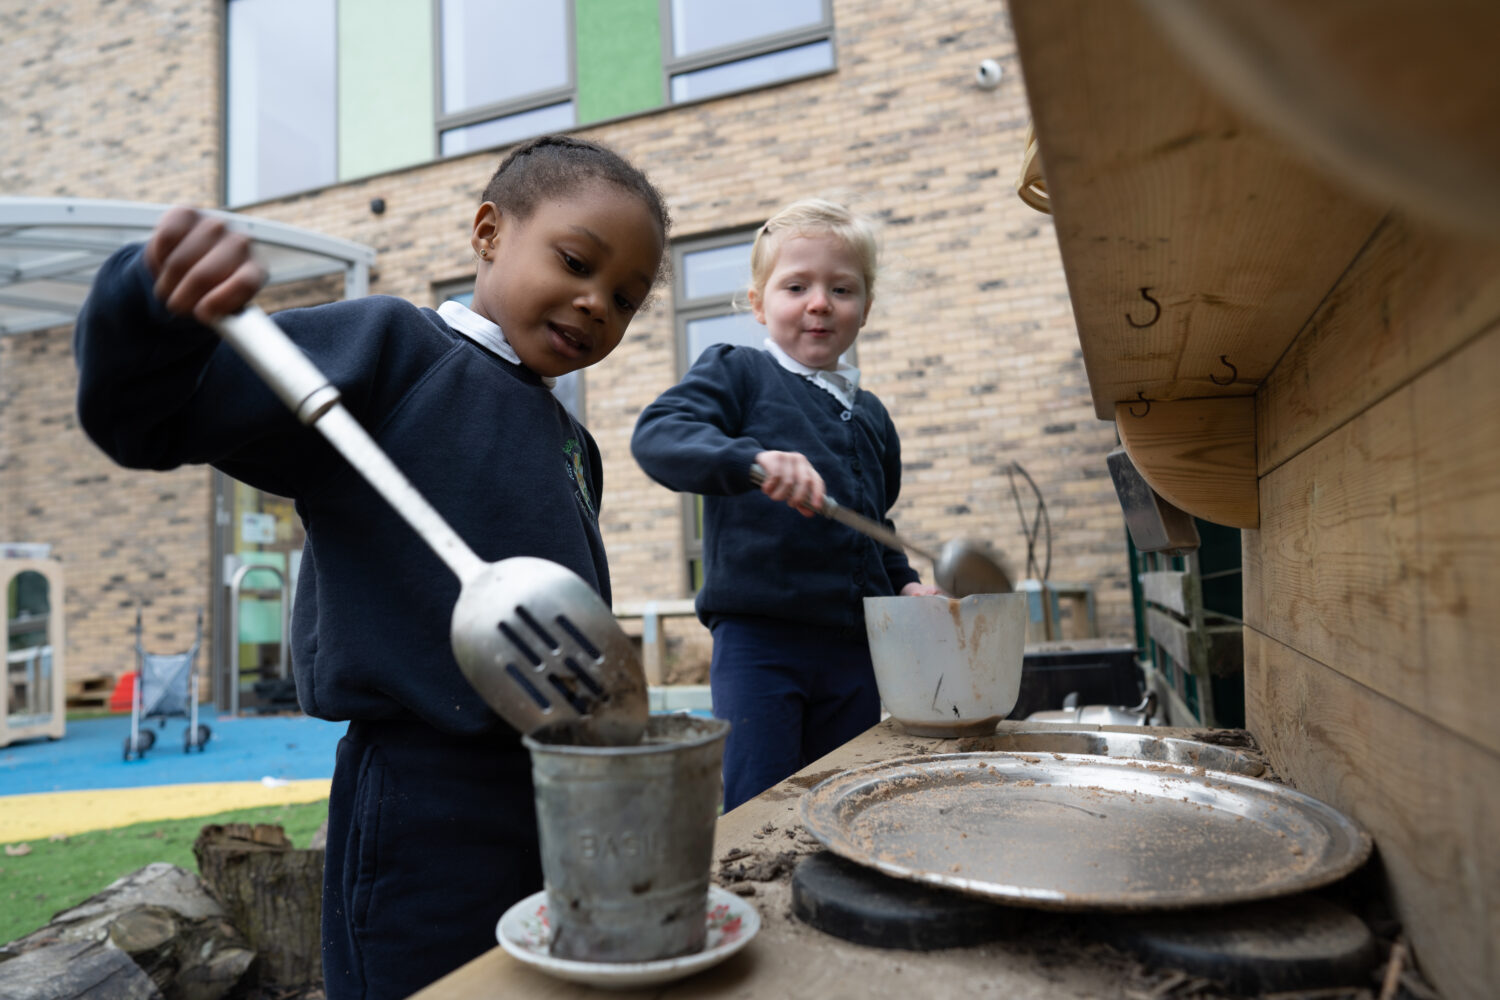 Two female pupils are pictured outdoors on the academy grounds, using cooking utensils to stir cake mixture in a large bowl.